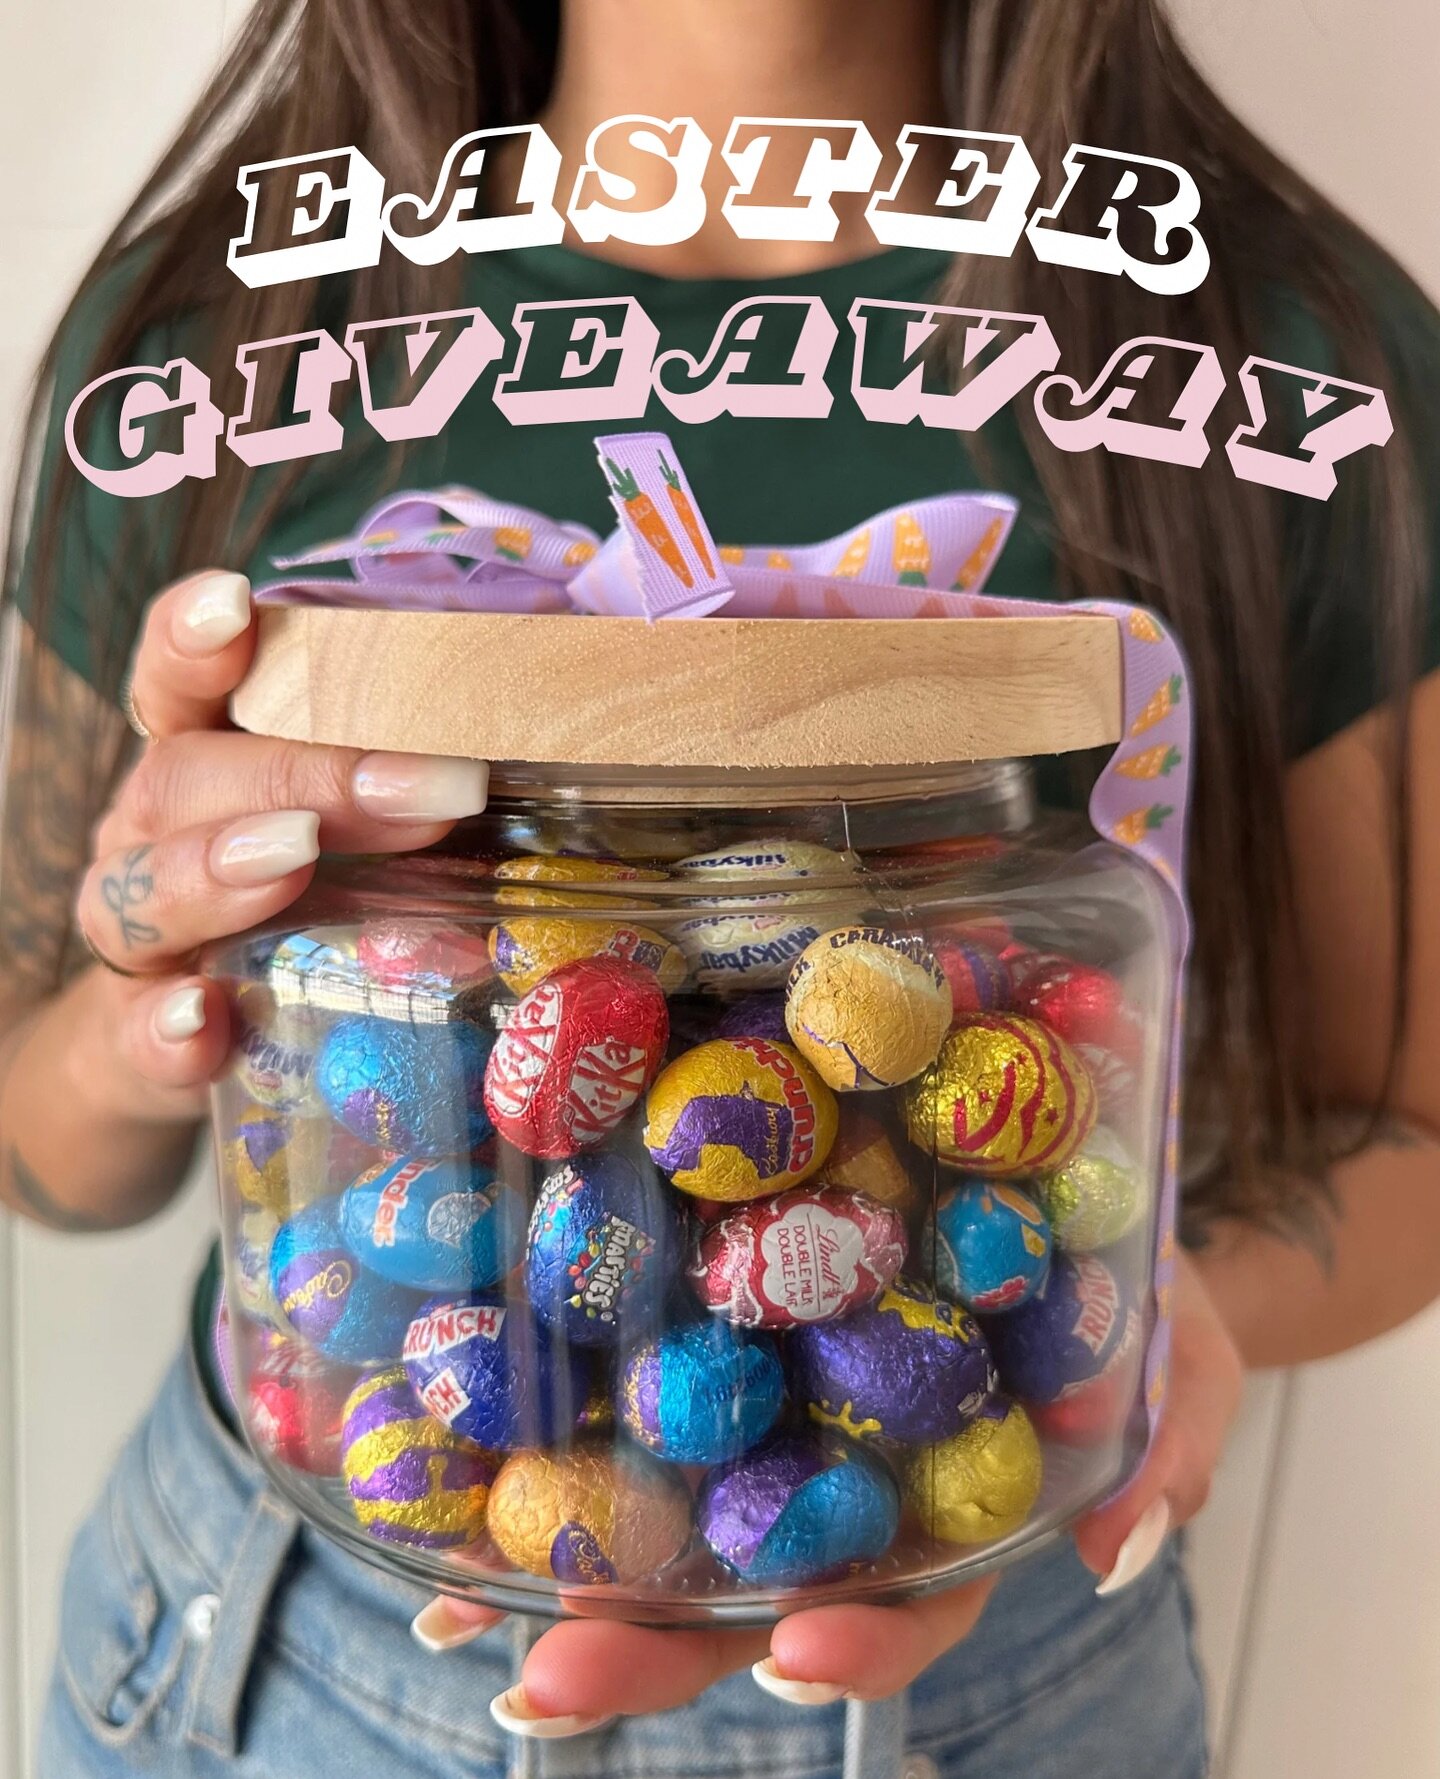 Competition time! We are giving away this jar of chocolate eggs to one lucky family 🤞 To be in the draw, simply follow us at @kenwickchildcare and tag a friend in the comments. Winner is drawn on the 28th of March by automated name generator. Good l